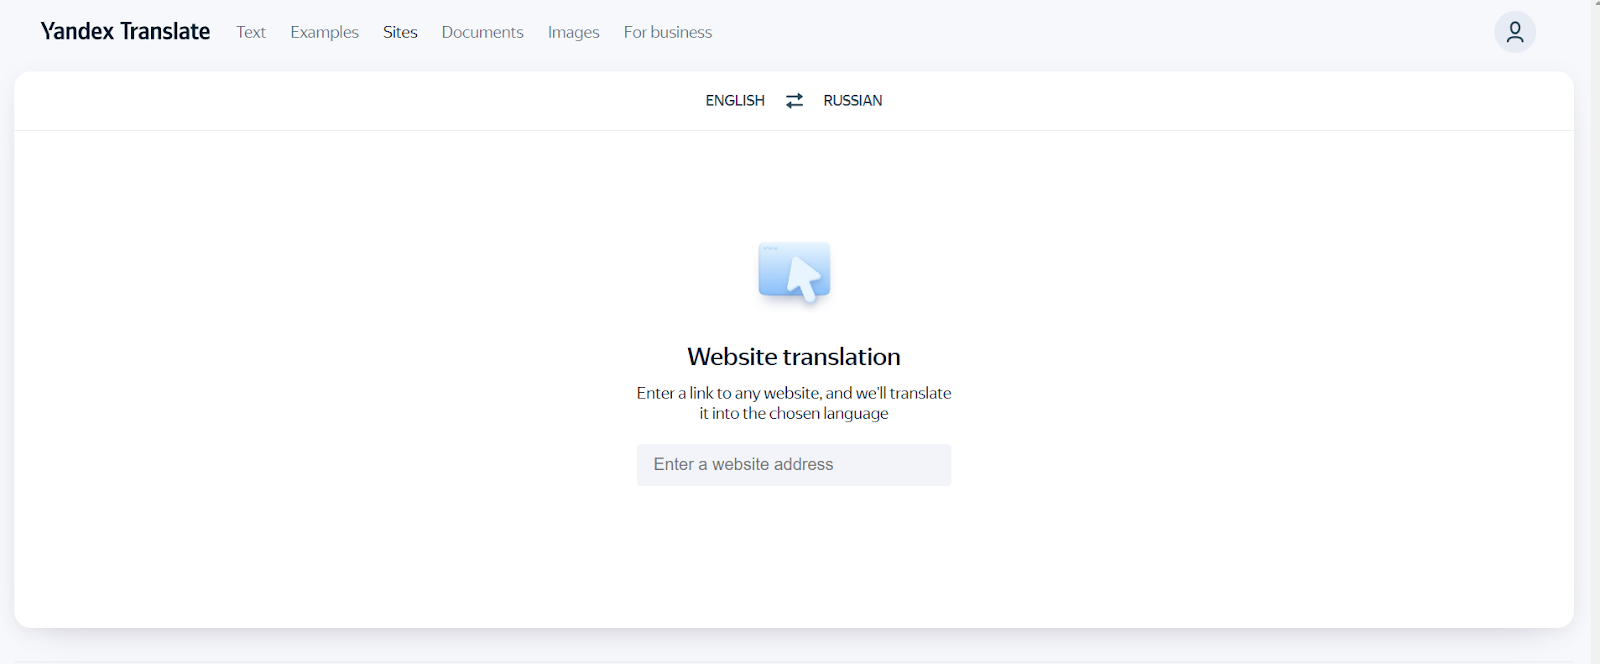 Translating web pages with Yandex Translate